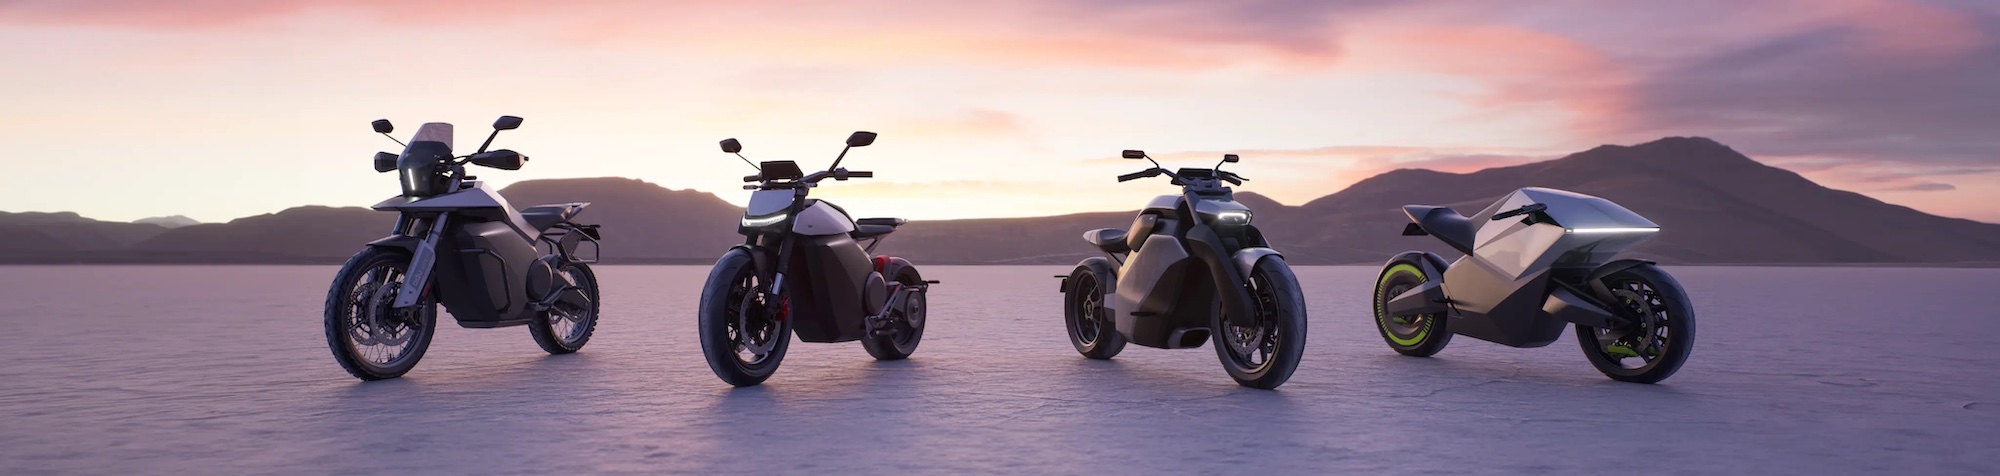 A view of Ola Electric's zero-emission motorcycles, debuted at MotoGP Bharat. From left to right: "Adventure," "roadster," "Cruiser," and "Diamondhead." Media sourced from Ola Electric.